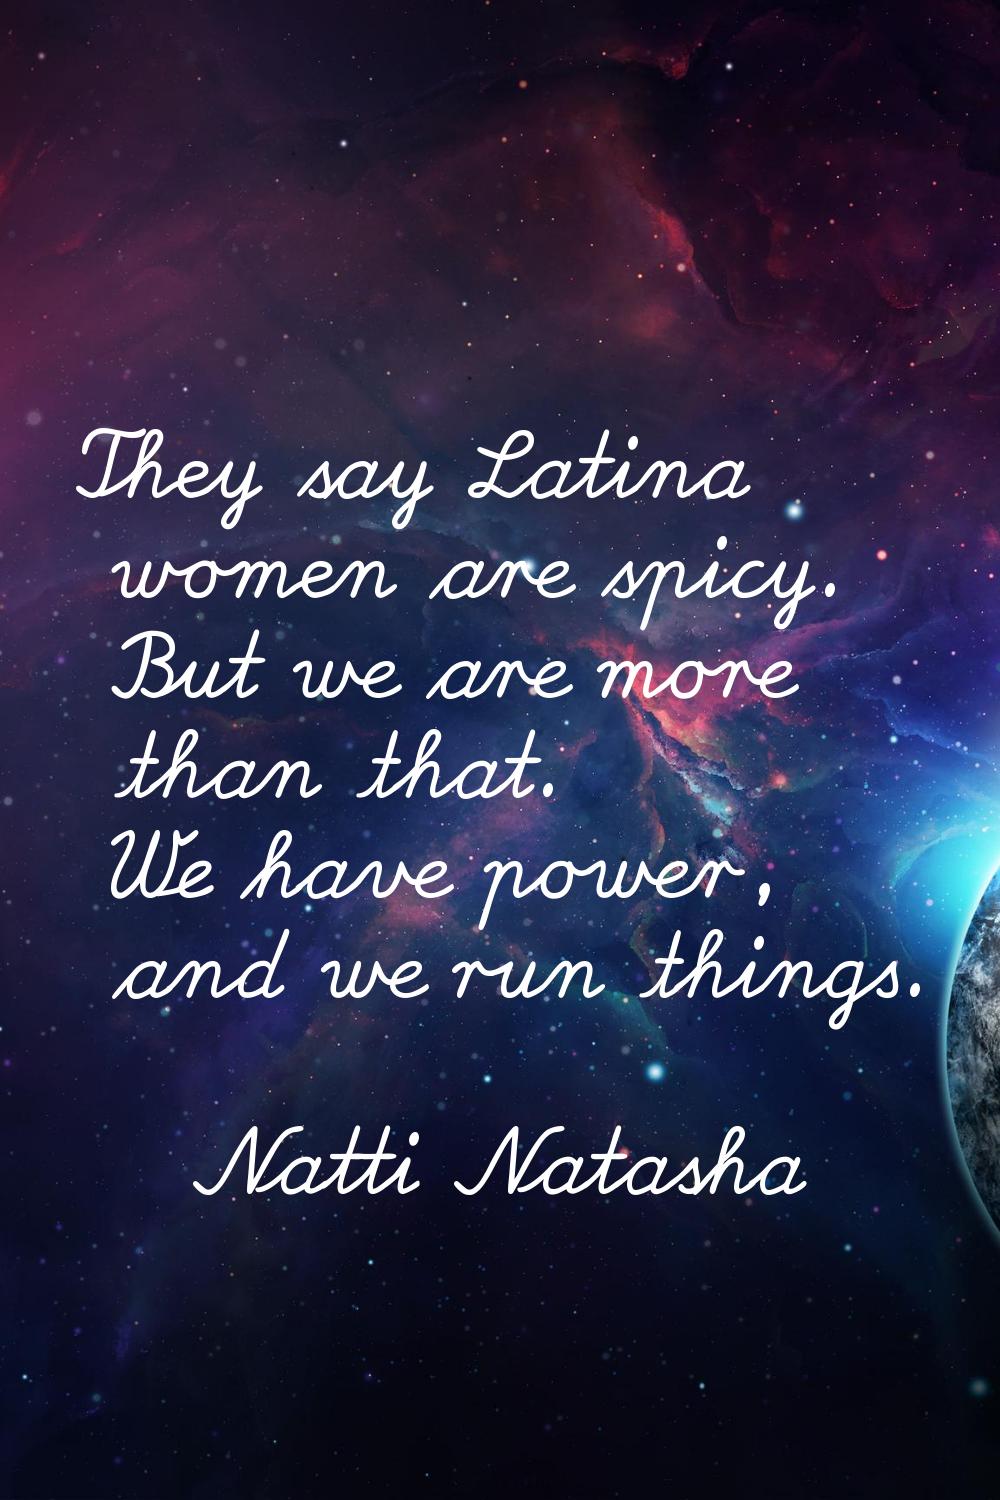 They say Latina women are spicy. But we are more than that. We have power, and we run things.